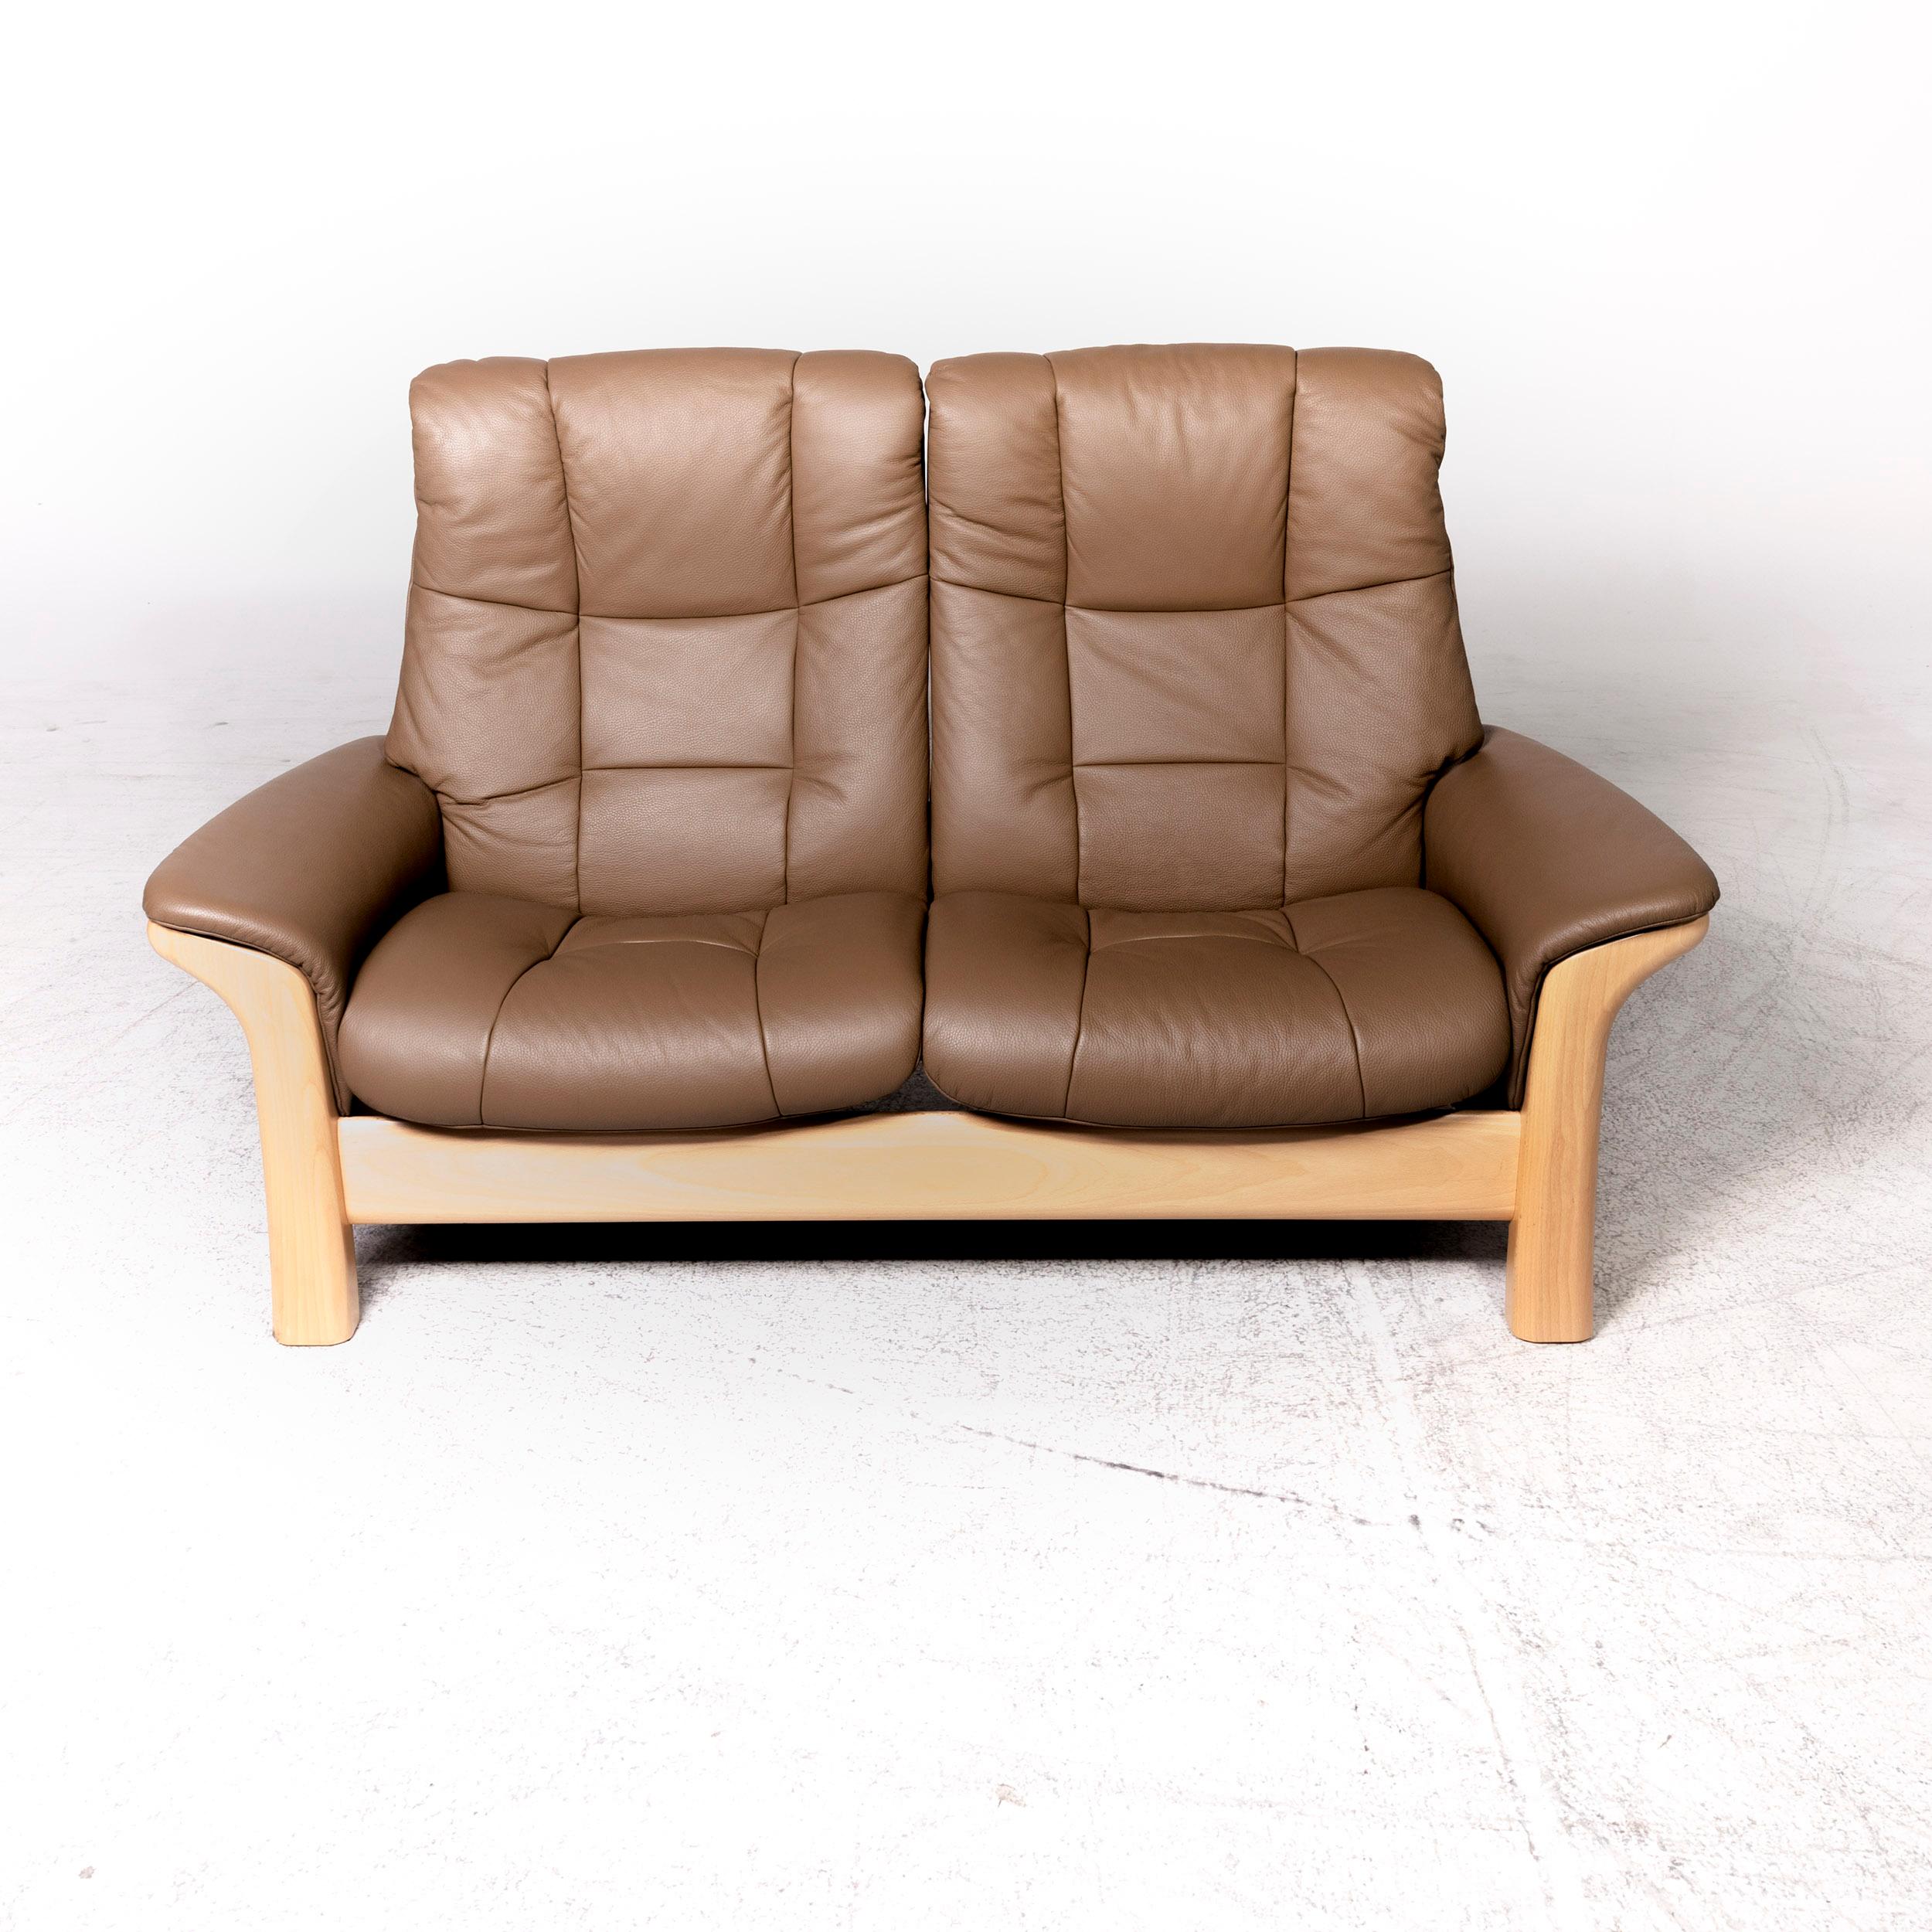 Norwegian Stressless Buckingham Leather Sofa Beige Real Leather Two-Seat Couch